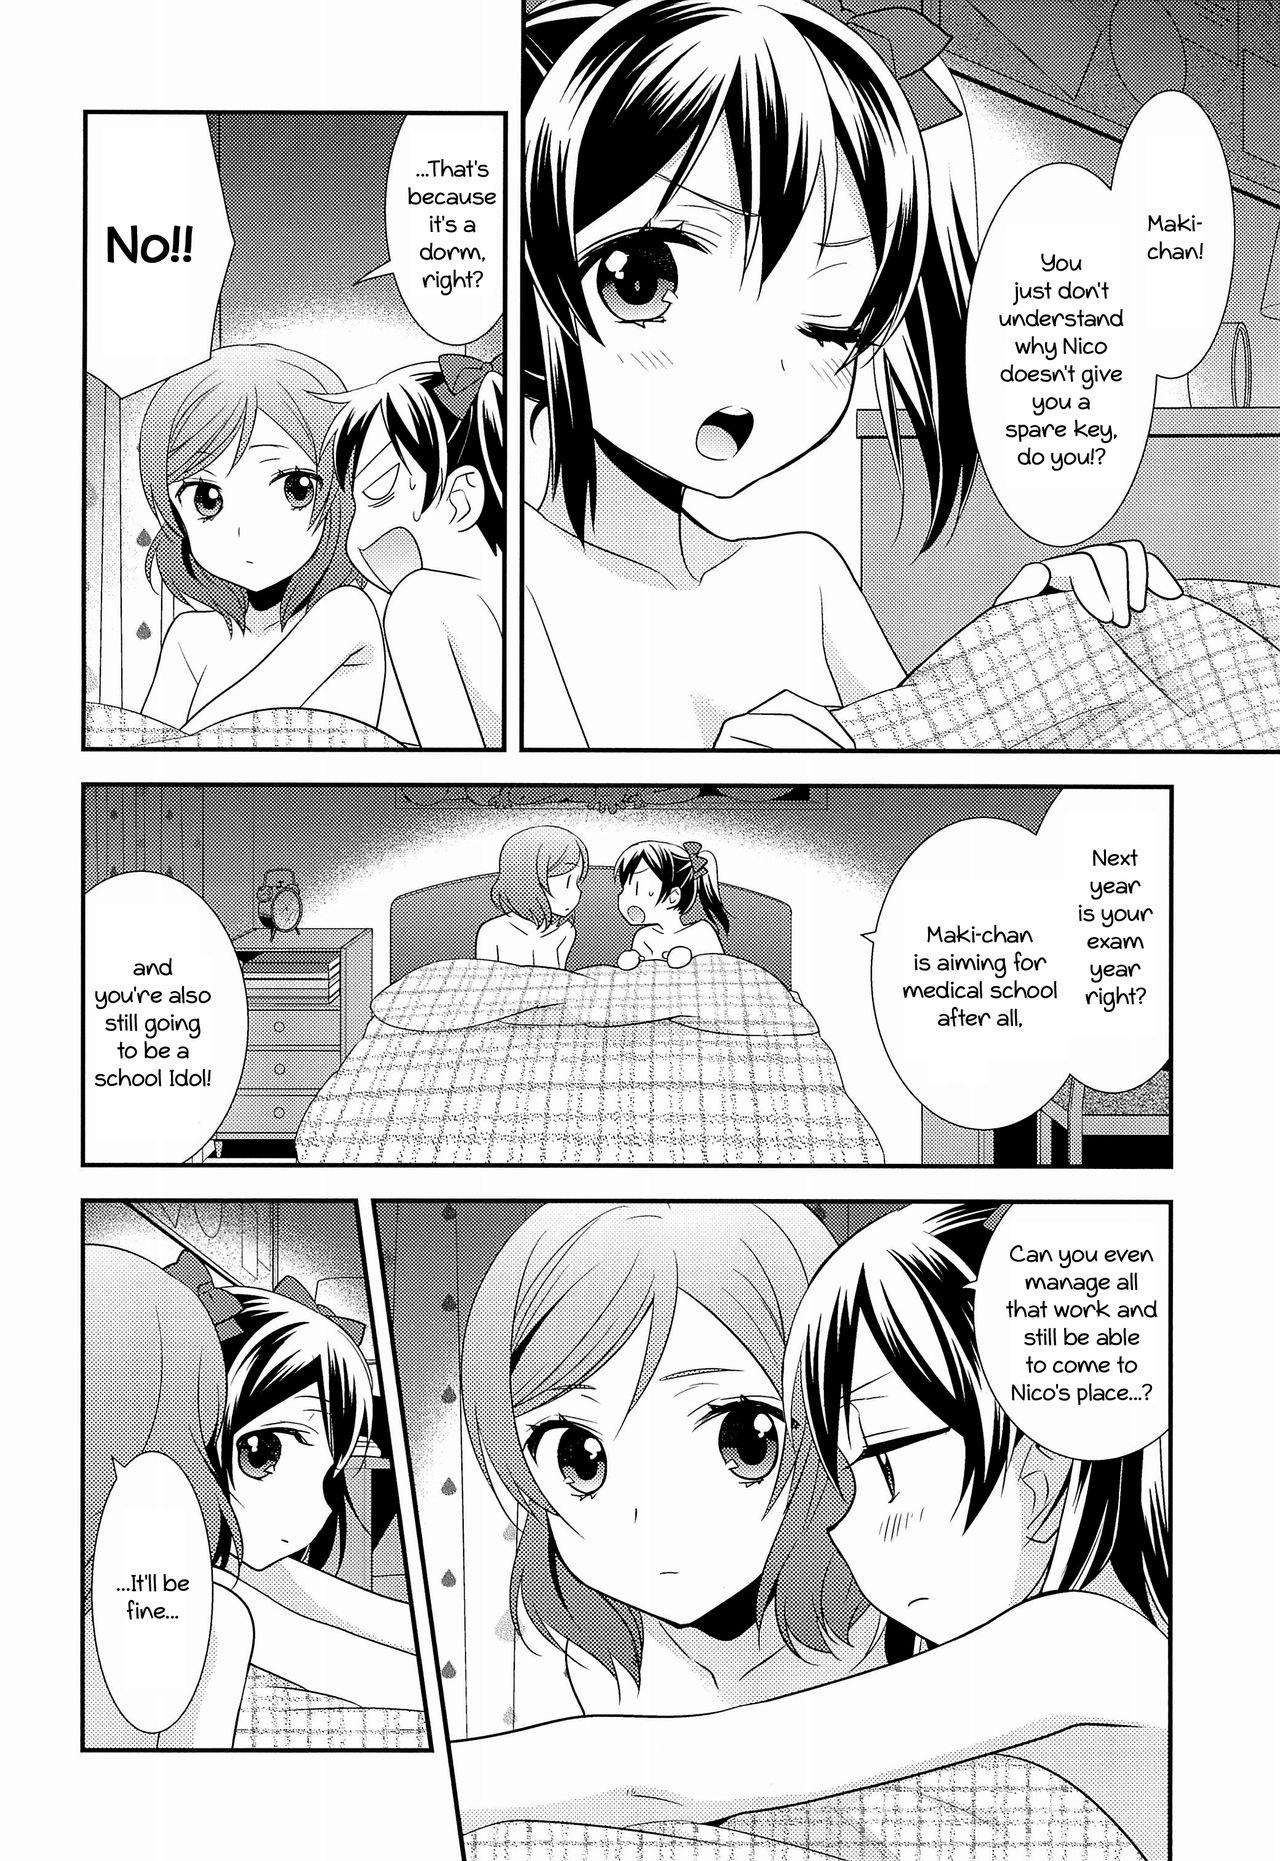 Naughty BABY I LOVE YOU - Love live New - Page 8